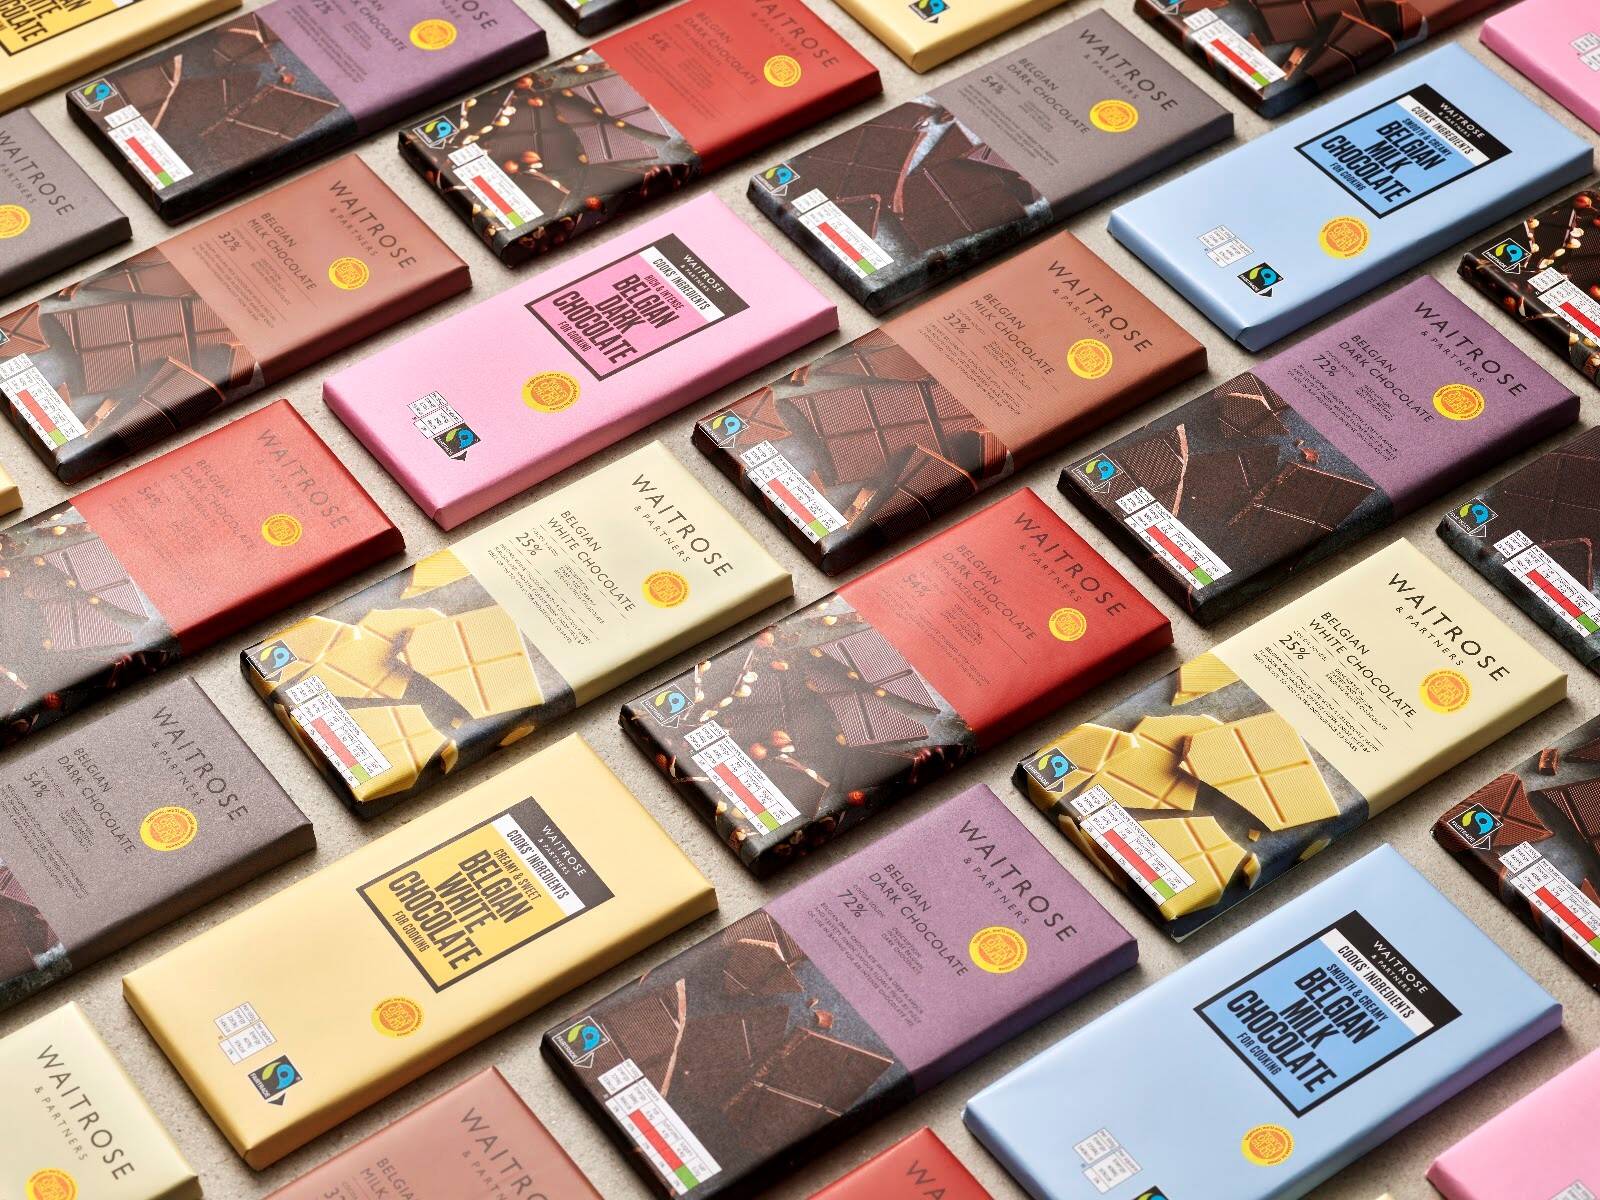 Waitrose partners with Tony’s Chocolonely for ethical cocoa sourcing initiative